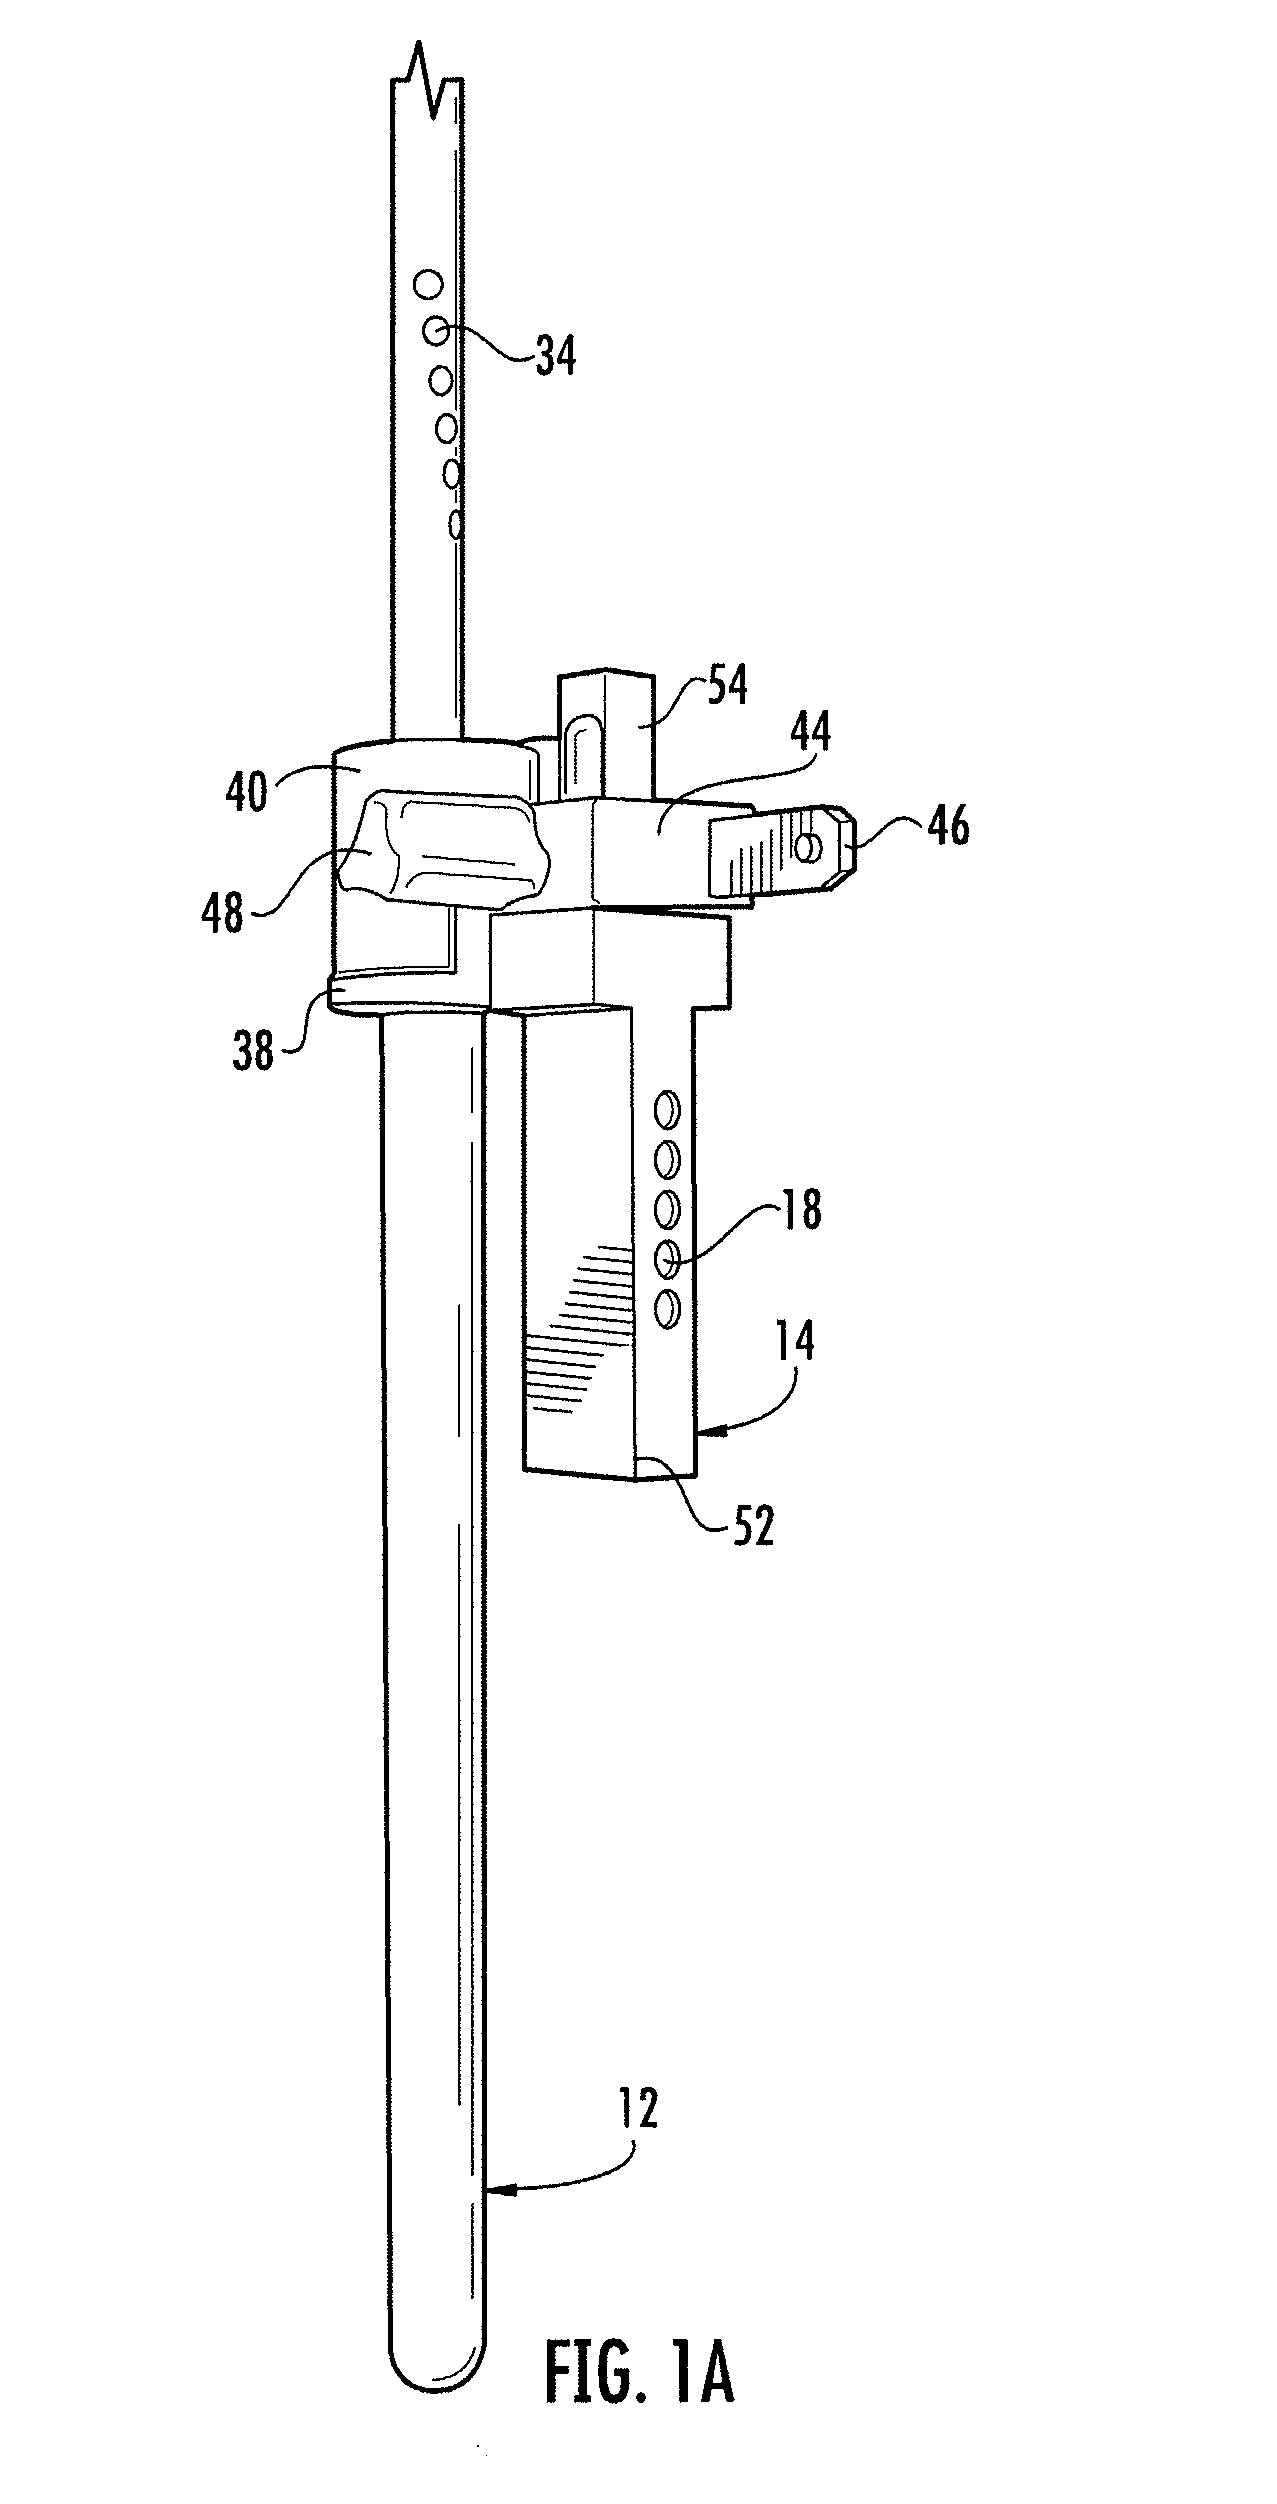 System for treating proximal humeral fractures and method of using the same